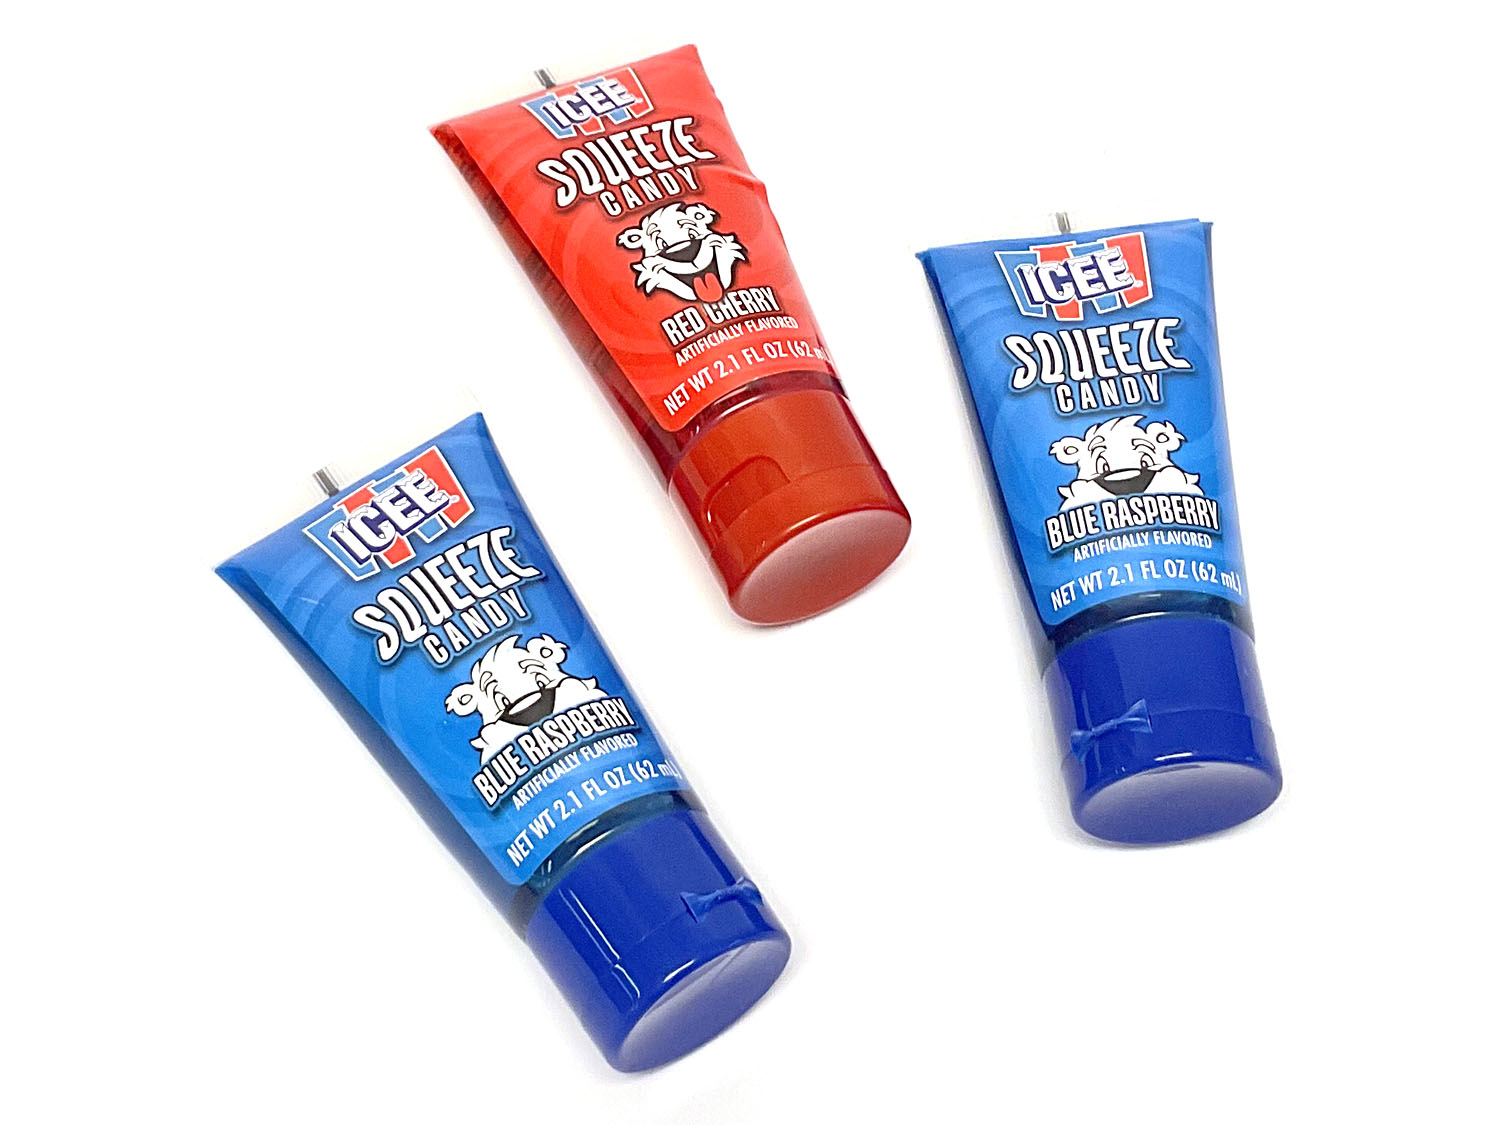 ICEE Squeeze Candy - 2.1 oz tube